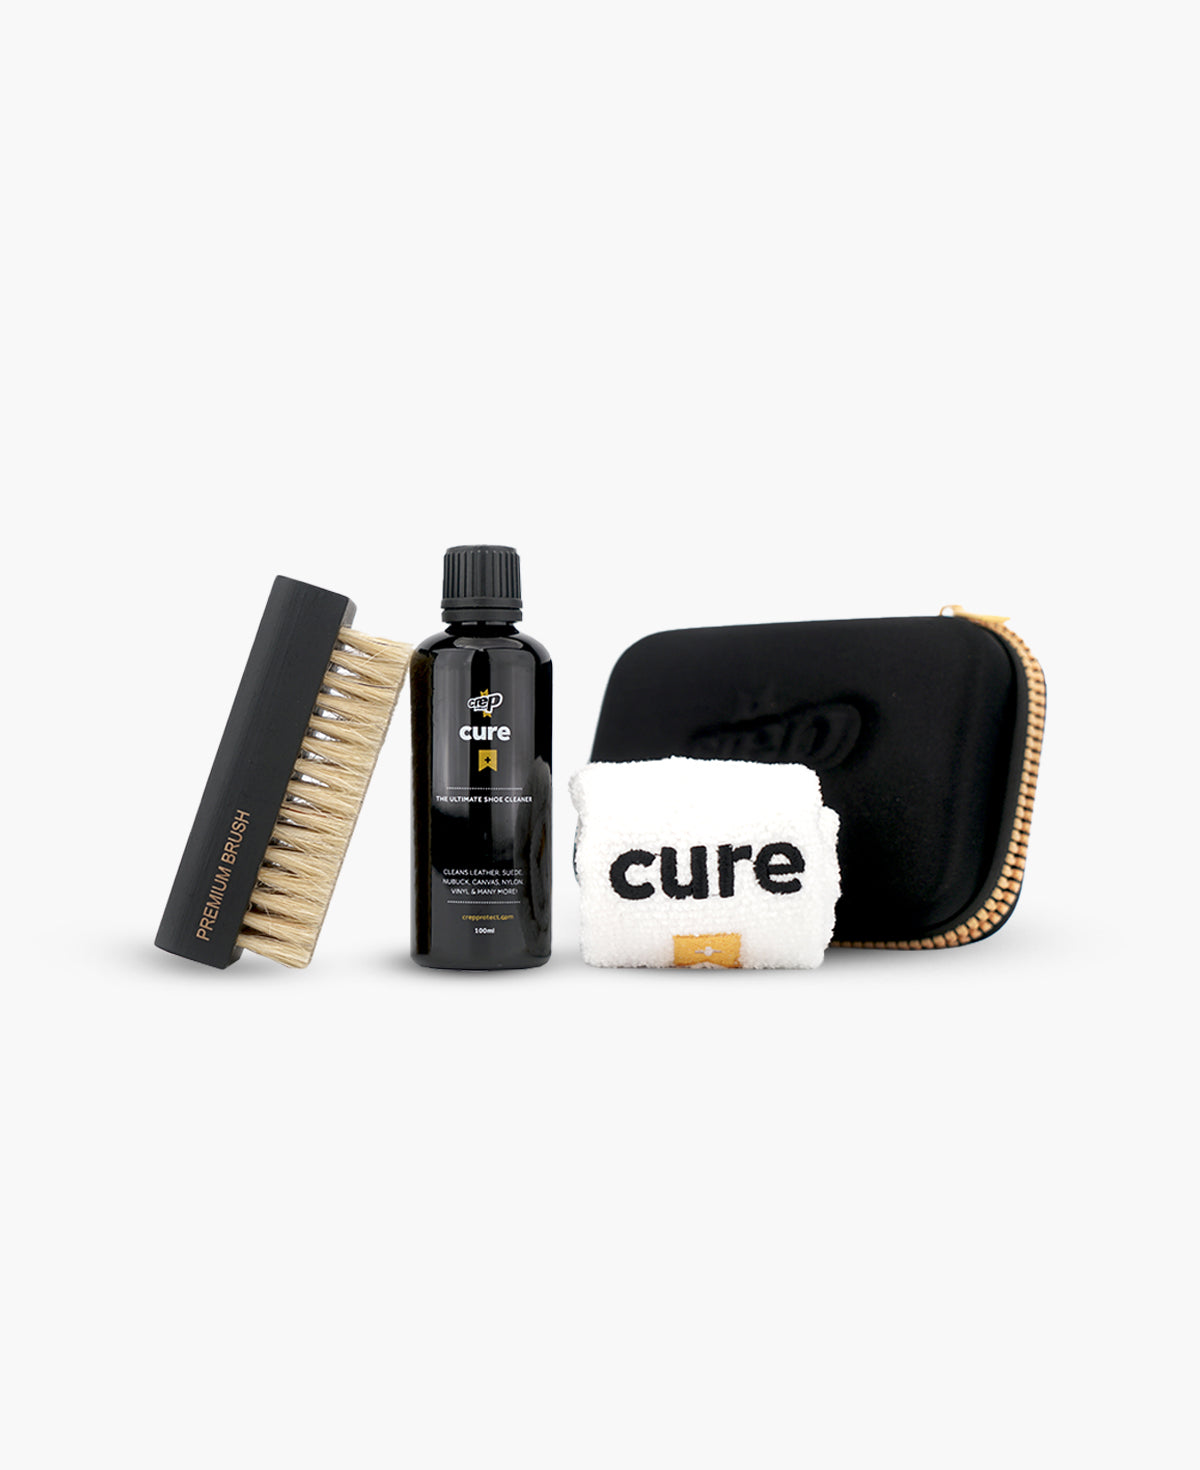 Image of Crep Protect Cure kit including 100ml solution, premium cleaning brush, microfibre cloth and carry case